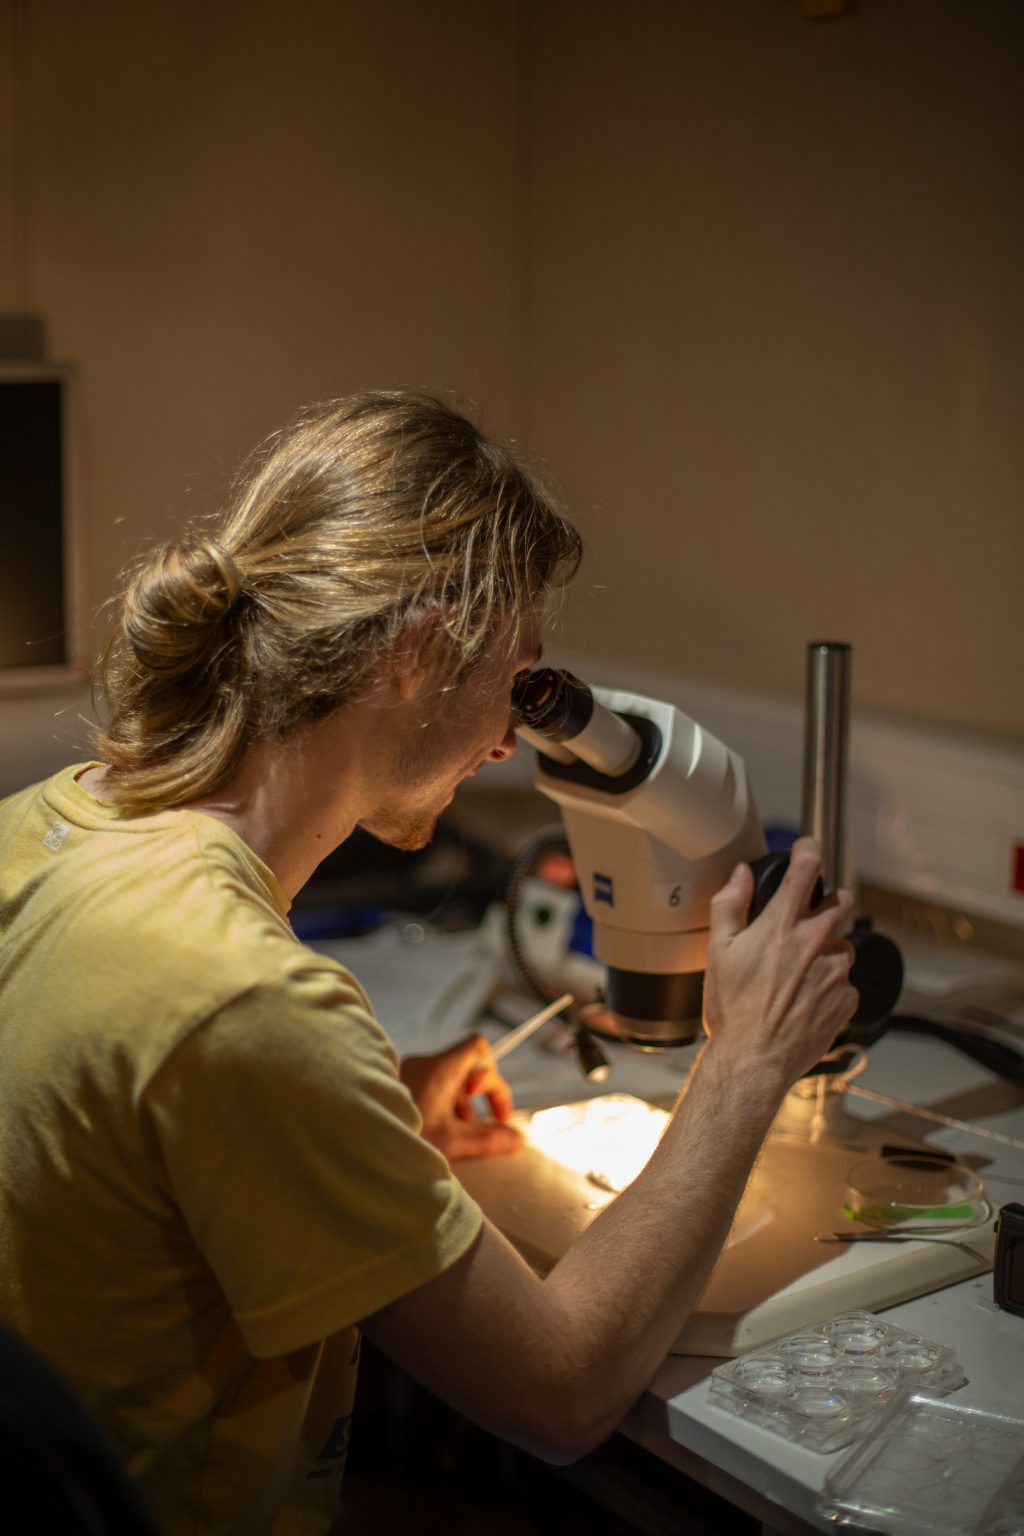 Photograph of someone looking at a specimen through a microscope.